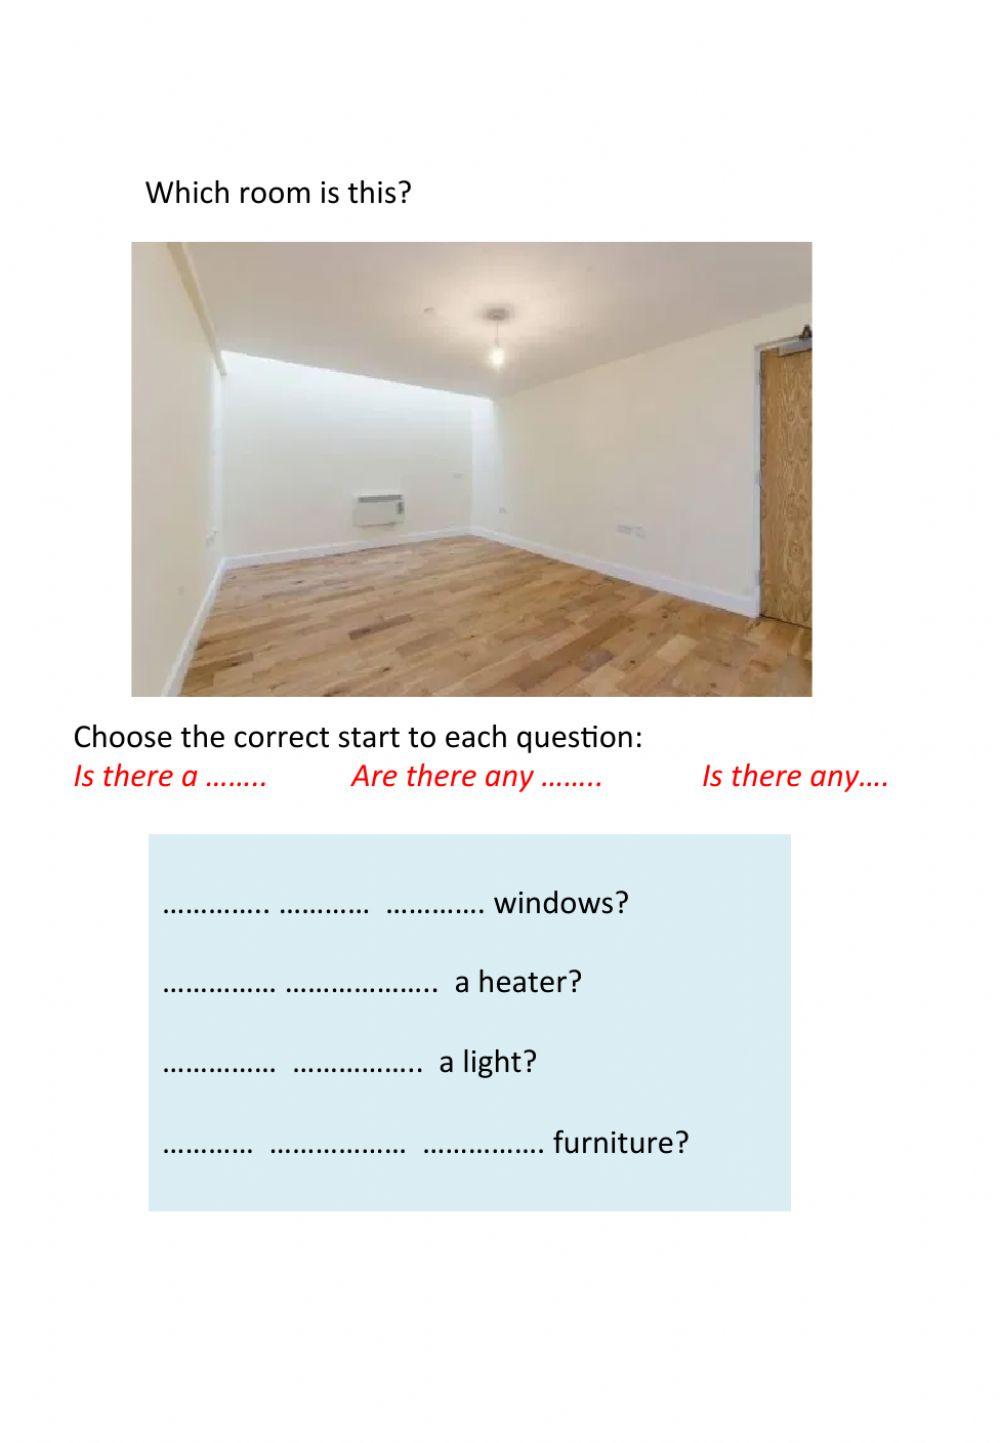 Ask questions about rooms in a flat